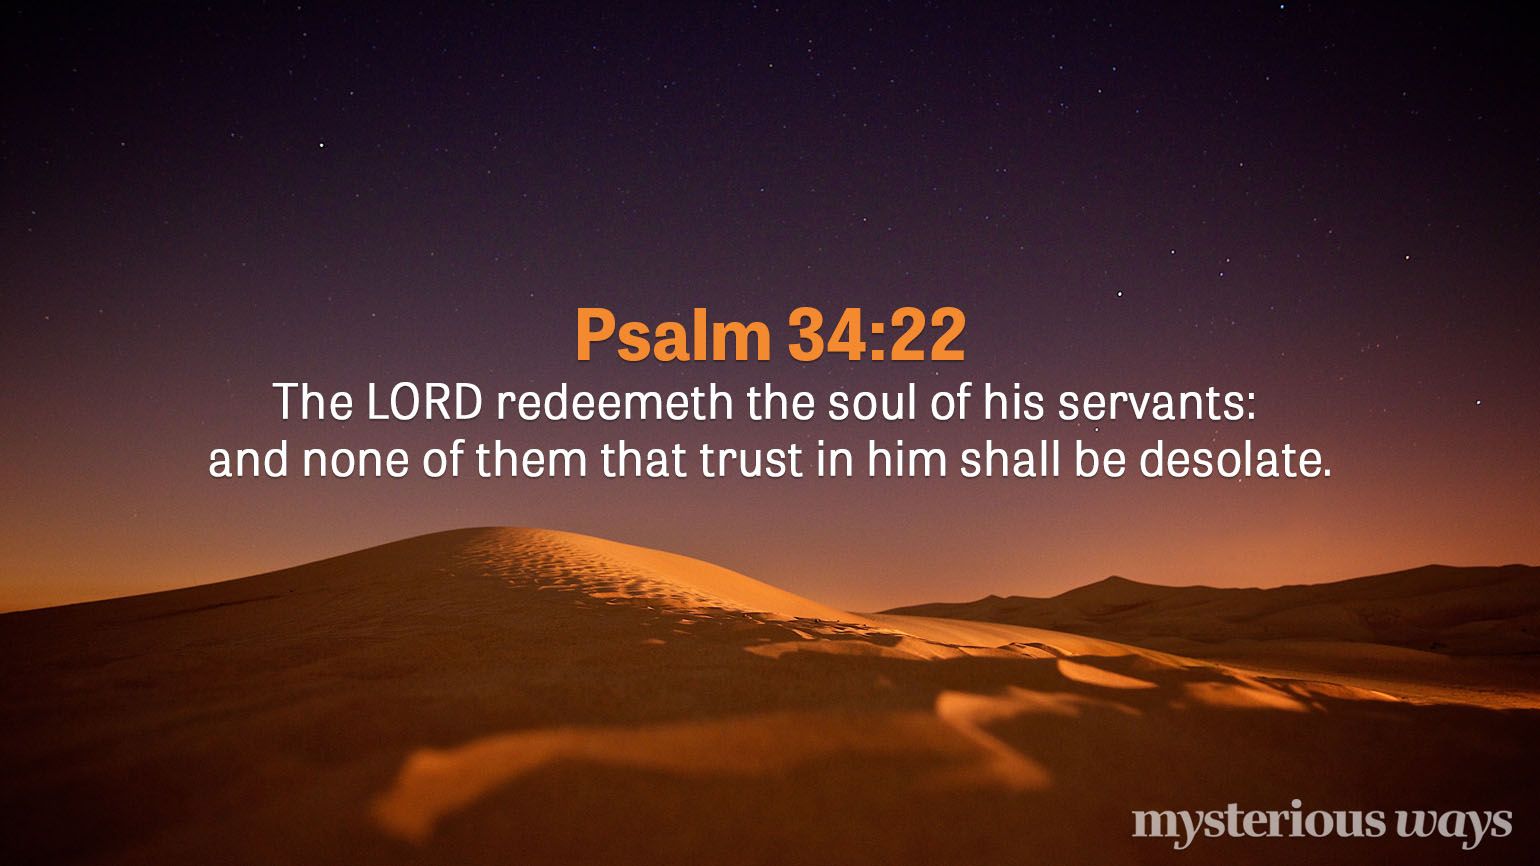 Psalm 34:22 “The LORD redeemeth the soul of his servants: and none of them that trust in him shall be desolate.”